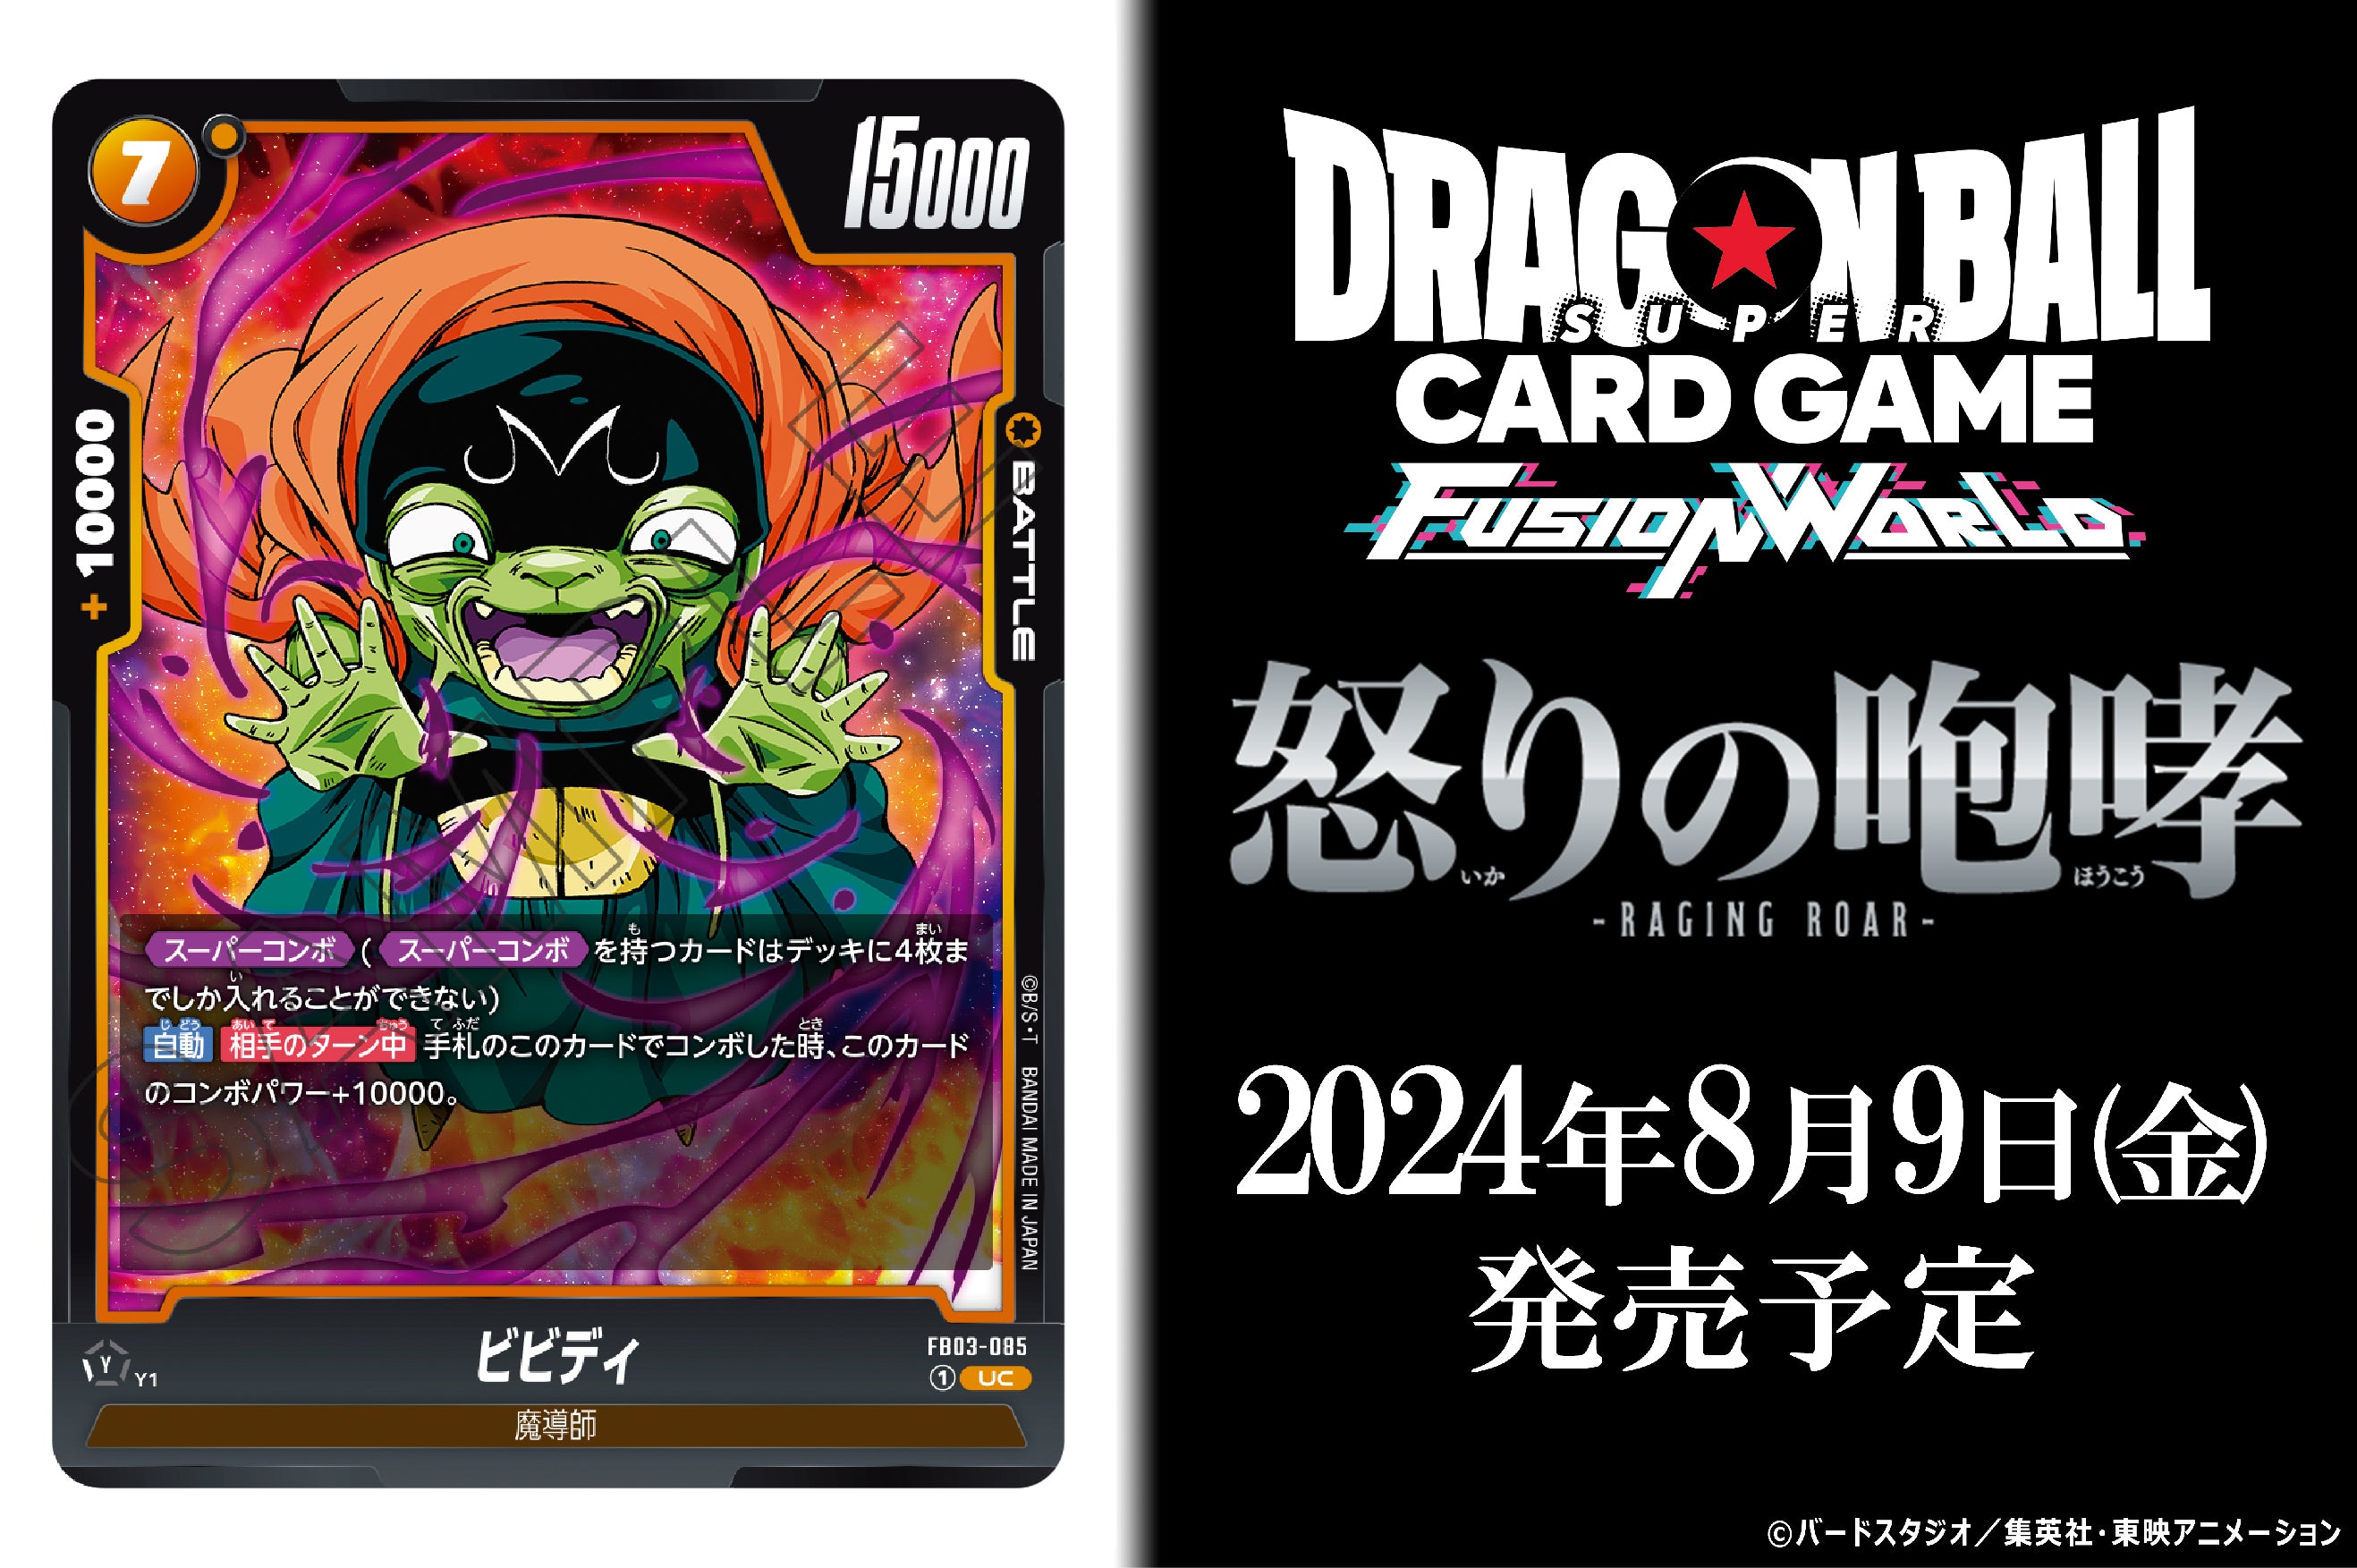 DRAGON BALL SUPER CARD GAME FUSION WORLD RAGING ROAR - FB03 [BOOSTER PACK]